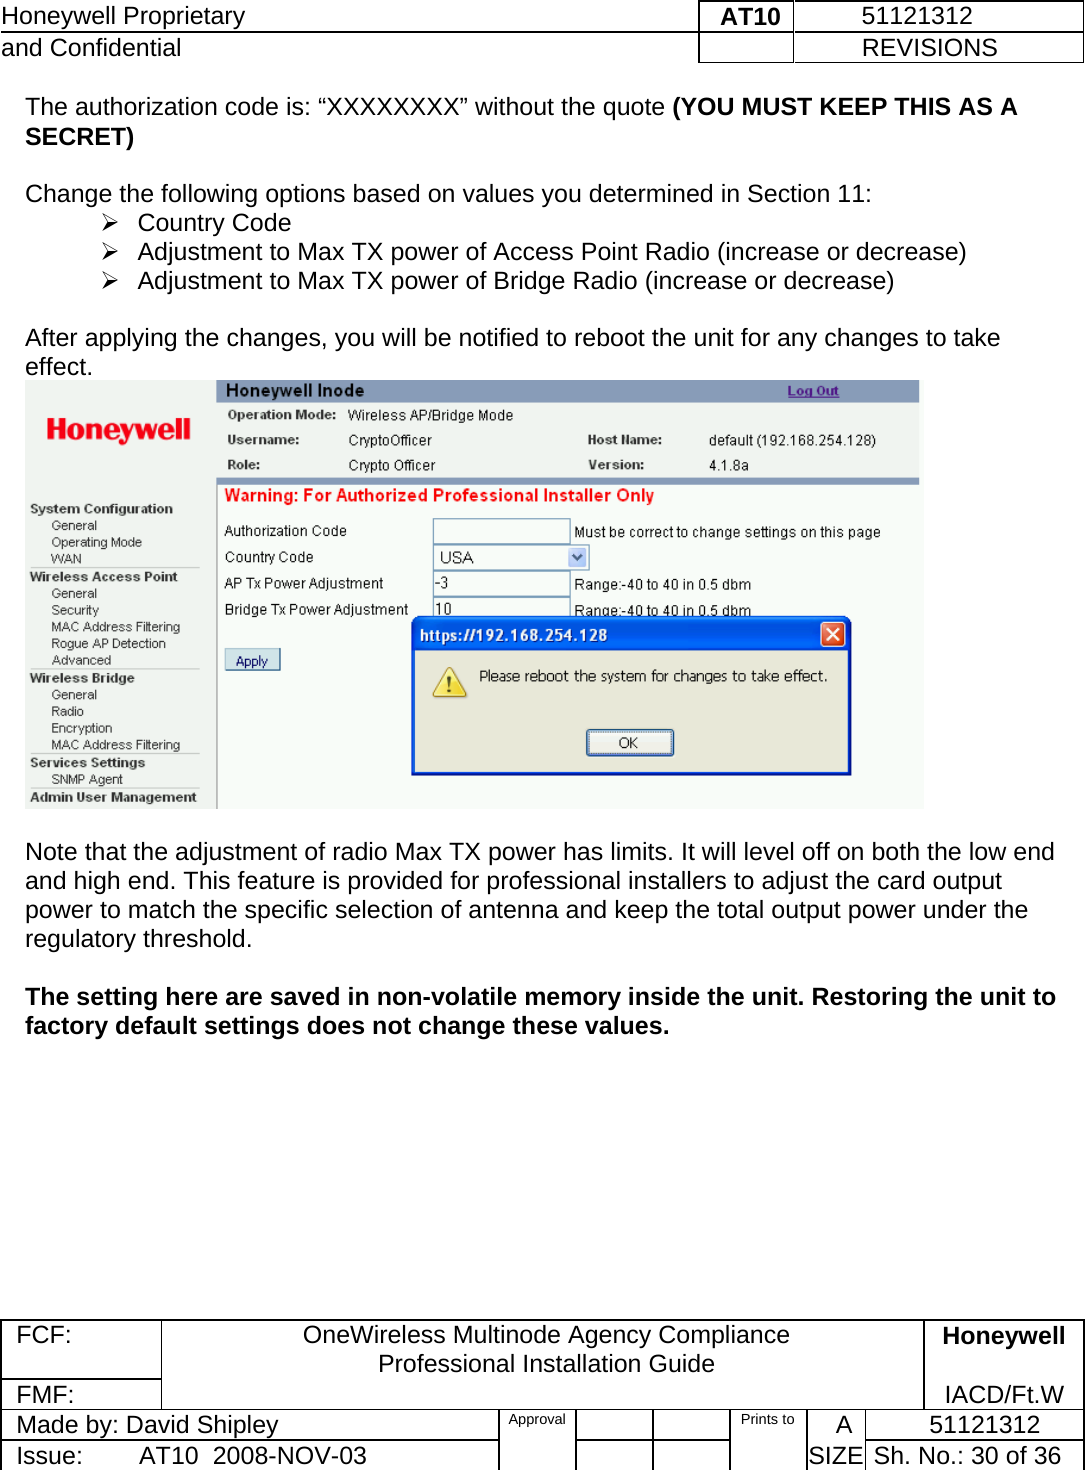 Honeywell Proprietary    AT10          51121312 and Confidential             REVISIONS  FCF:  OneWireless Multinode Agency Compliance Professional Installation Guide  Honeywell FMF:               IACD/Ft.W Made by: David Shipley  Approval   Prints to     A           51121312 Issue:        AT10  2008-NOV-03          SIZE  Sh. No.: 30 of 36  The authorization code is: “XXXXXXXX” without the quote (YOU MUST KEEP THIS AS A SECRET)  Change the following options based on values you determined in Section 11:   ¾ Country Code ¾  Adjustment to Max TX power of Access Point Radio (increase or decrease) ¾  Adjustment to Max TX power of Bridge Radio (increase or decrease)  After applying the changes, you will be notified to reboot the unit for any changes to take effect.   Note that the adjustment of radio Max TX power has limits. It will level off on both the low end and high end. This feature is provided for professional installers to adjust the card output power to match the specific selection of antenna and keep the total output power under the regulatory threshold.  The setting here are saved in non-volatile memory inside the unit. Restoring the unit to factory default settings does not change these values.  